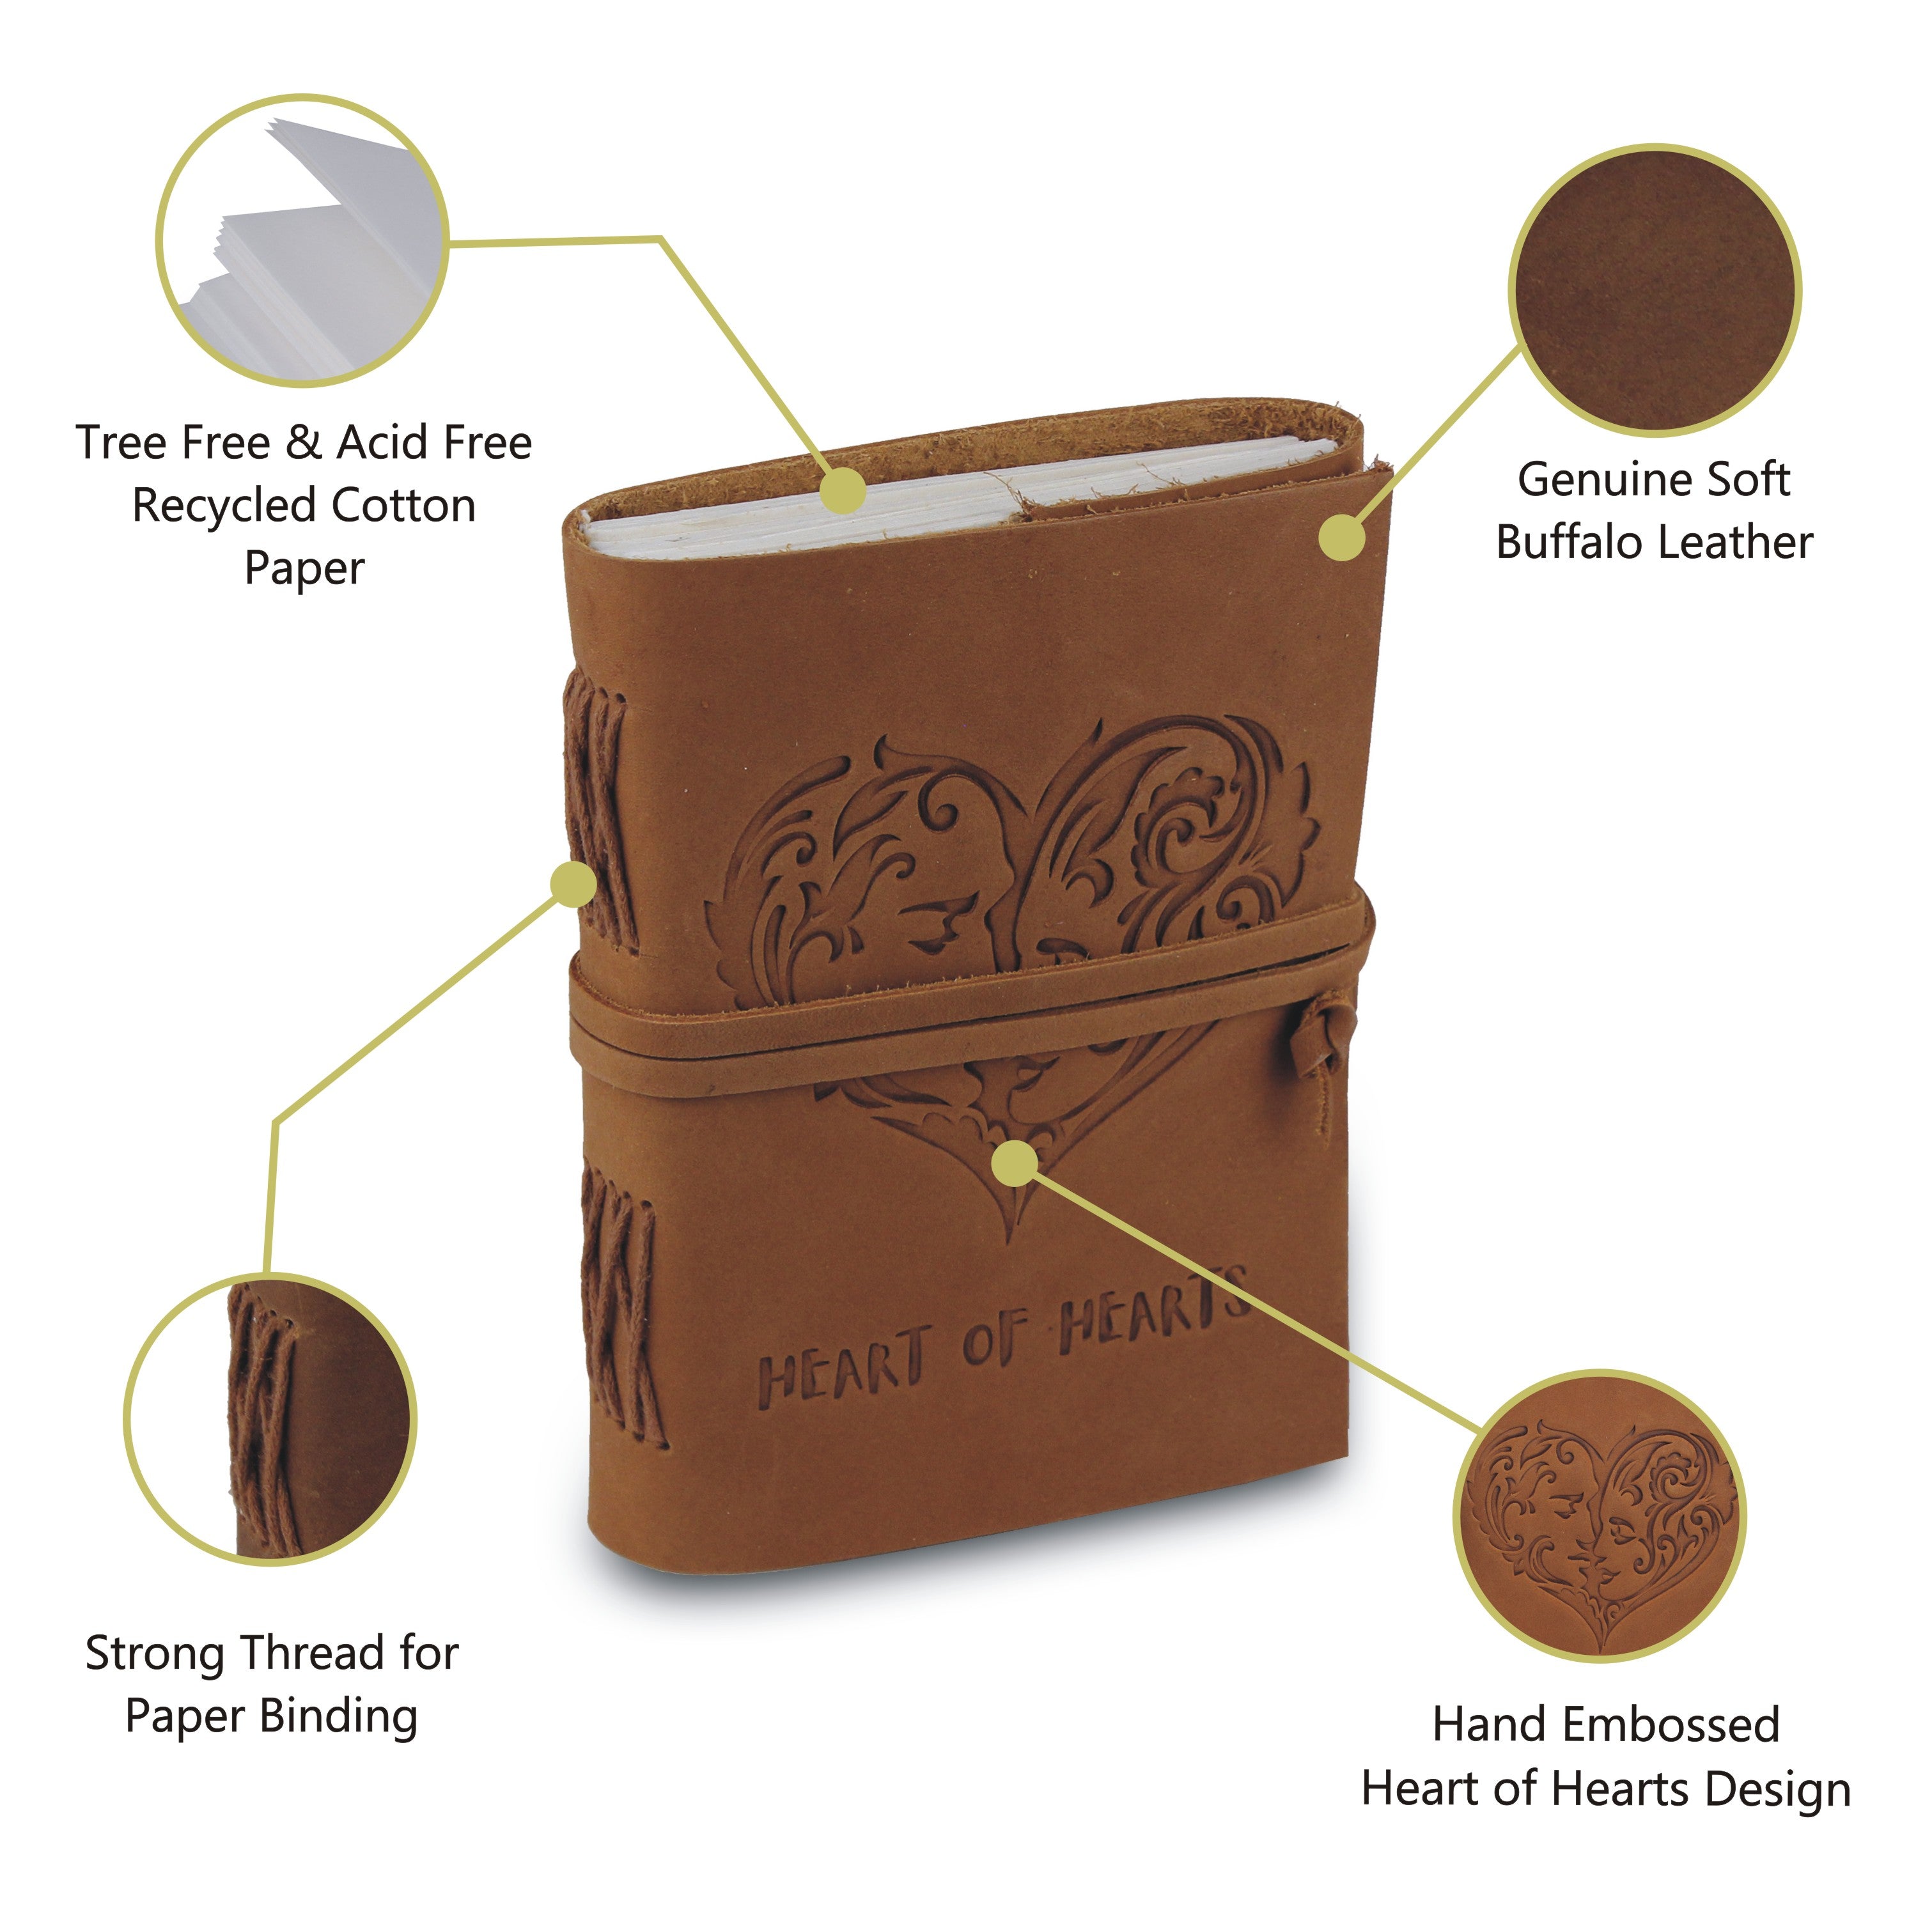 Leather Diary By Handmade World showing features of the diary like strong thread binding, hand embossing, acid free paper and genuine leather